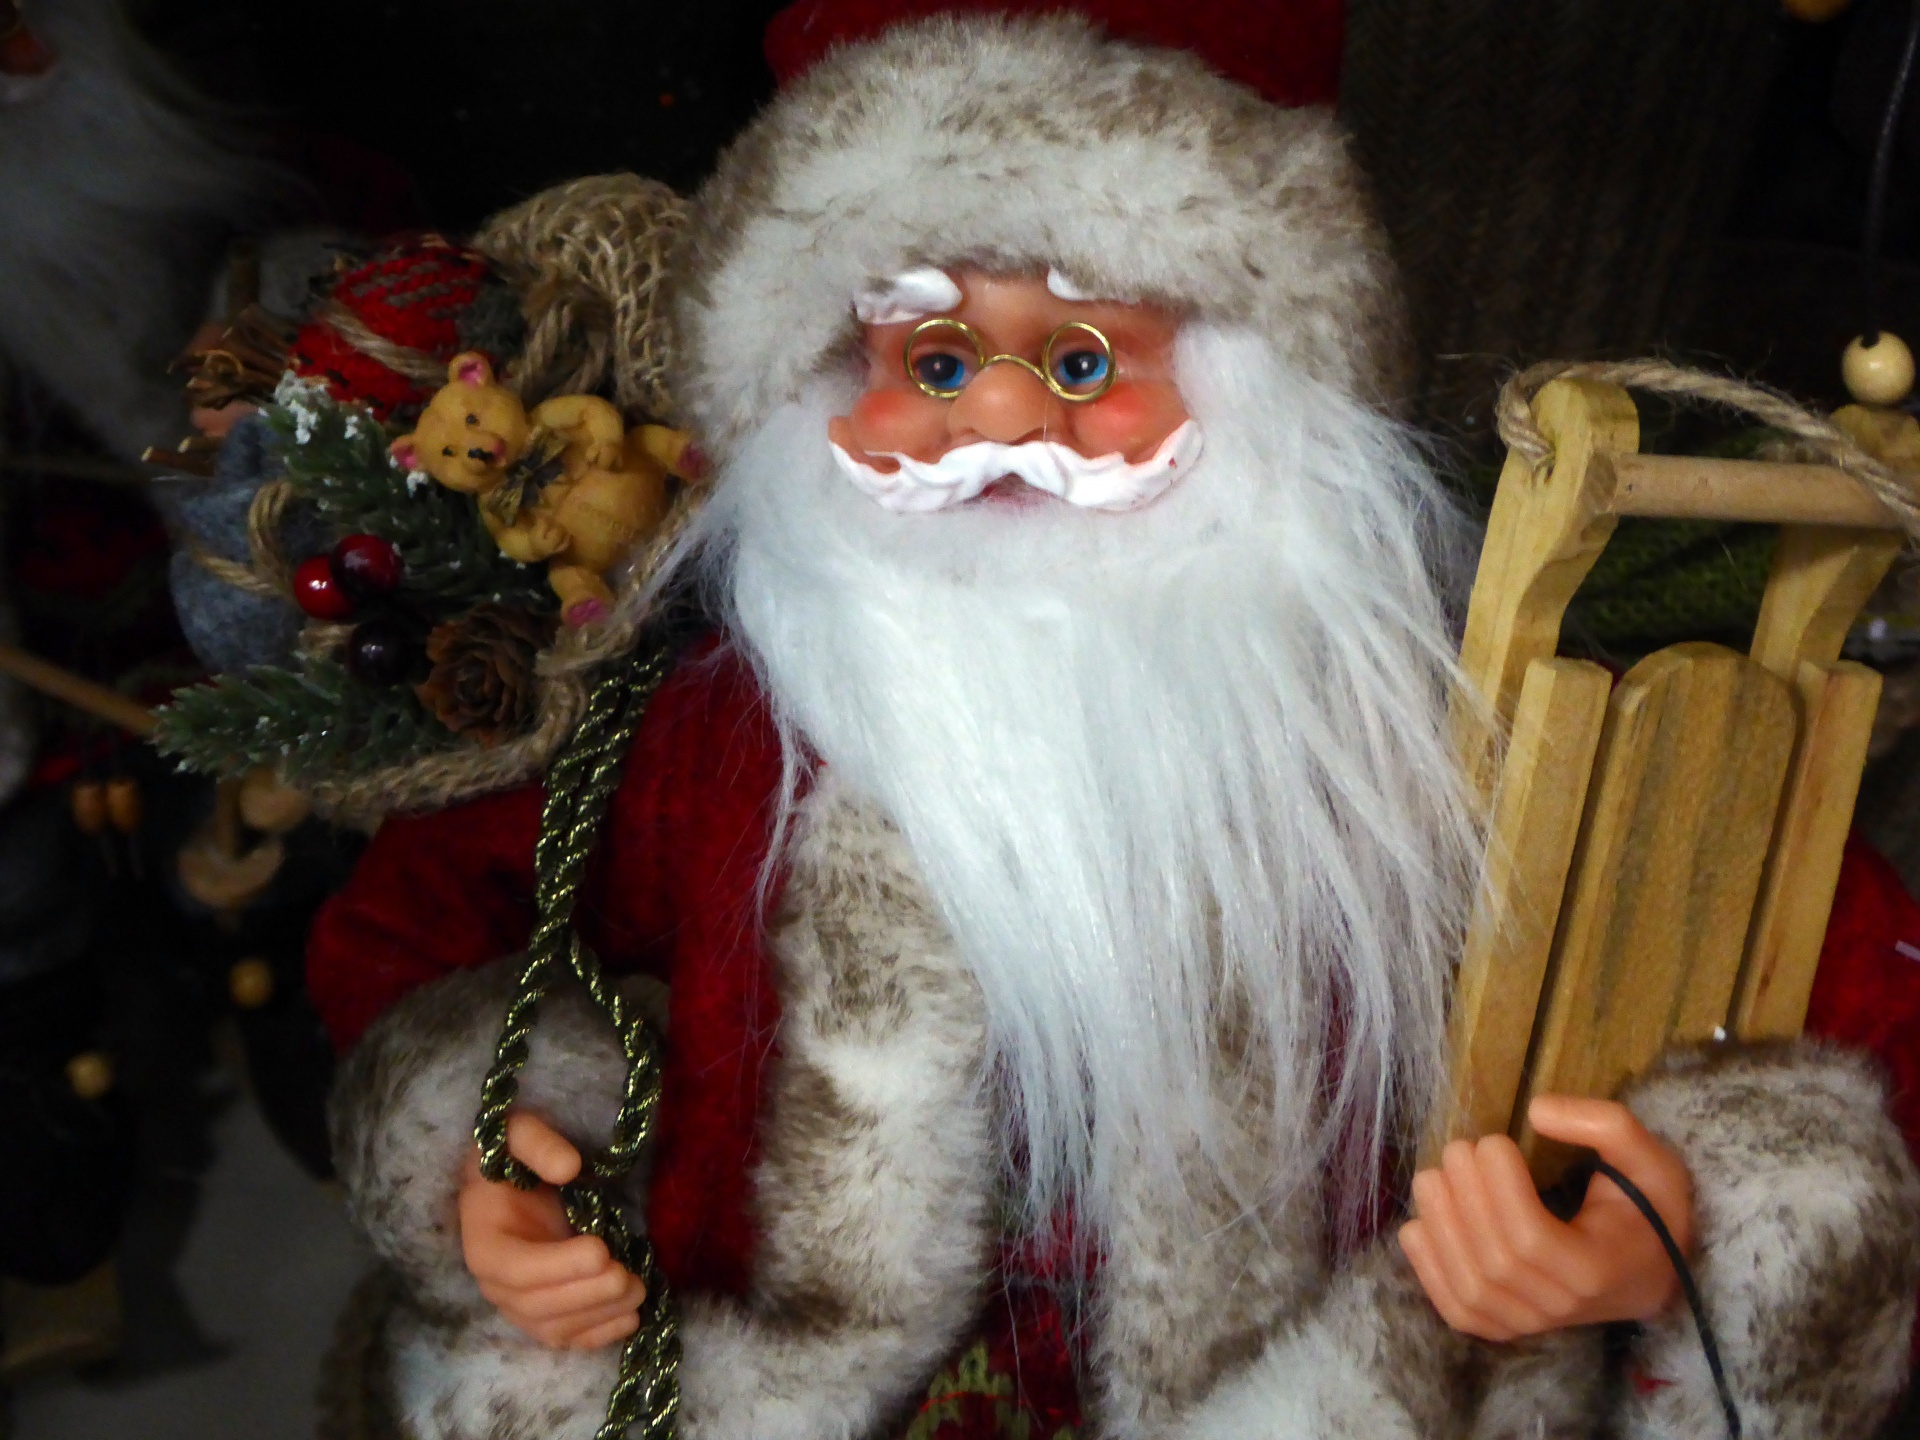 Christmas decoration of Santa Claus with bag of toys hoisted over his shoulder and carrying a sled in other arm